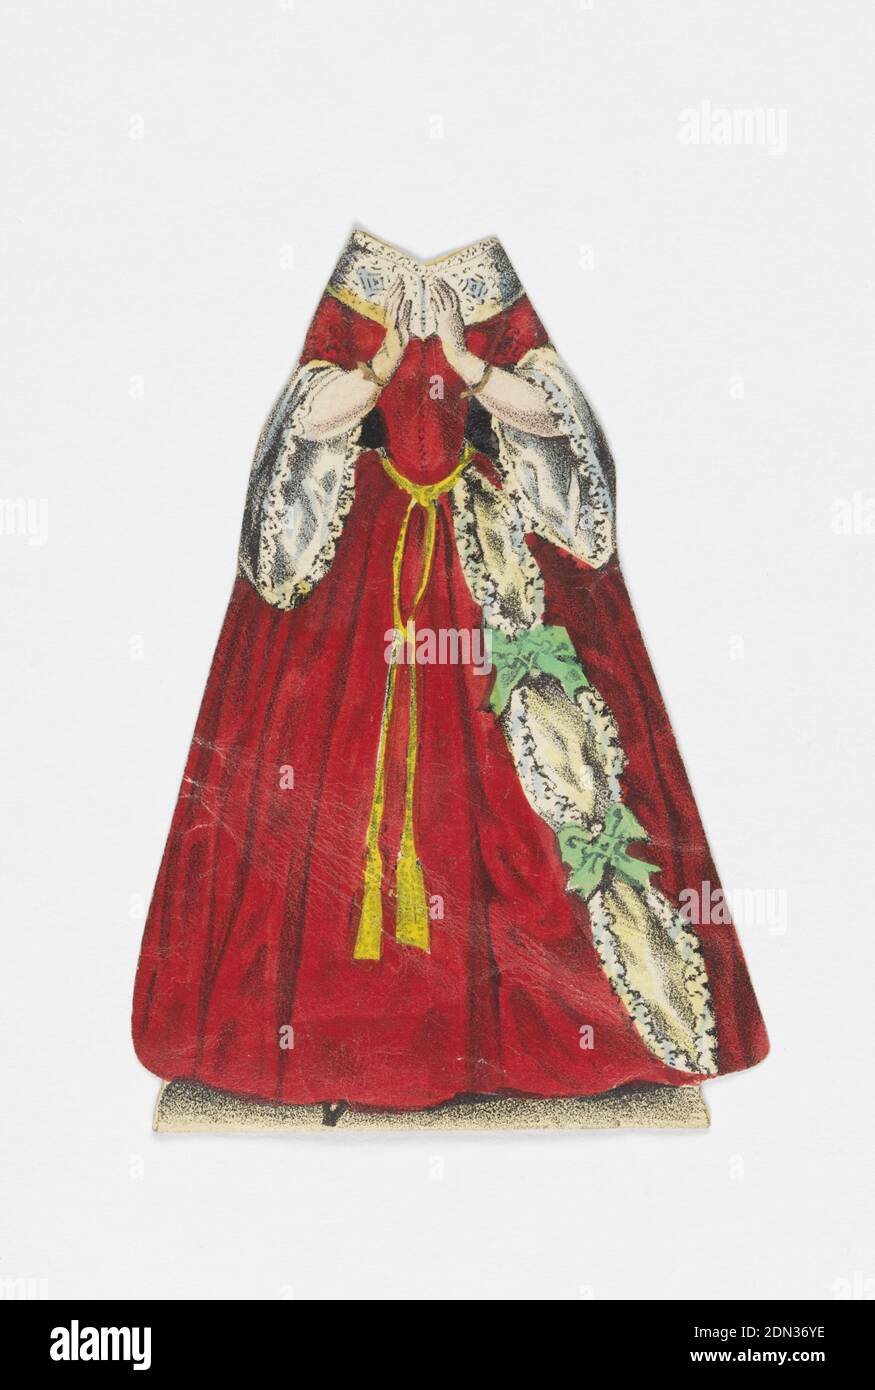 Jenny Lind Paper Doll Costume, Valentine from the opera 'Die Hugenotten' (The Huguenots), Lithograph on white wove paper, Paper doll costume for the figure of Jenny Lind representing the character Valentine from the opera Die Hugenotten (The Huguenots). Designed to be placed over the doll., Europe, ca. 1850, toys & games, Print Stock Photo